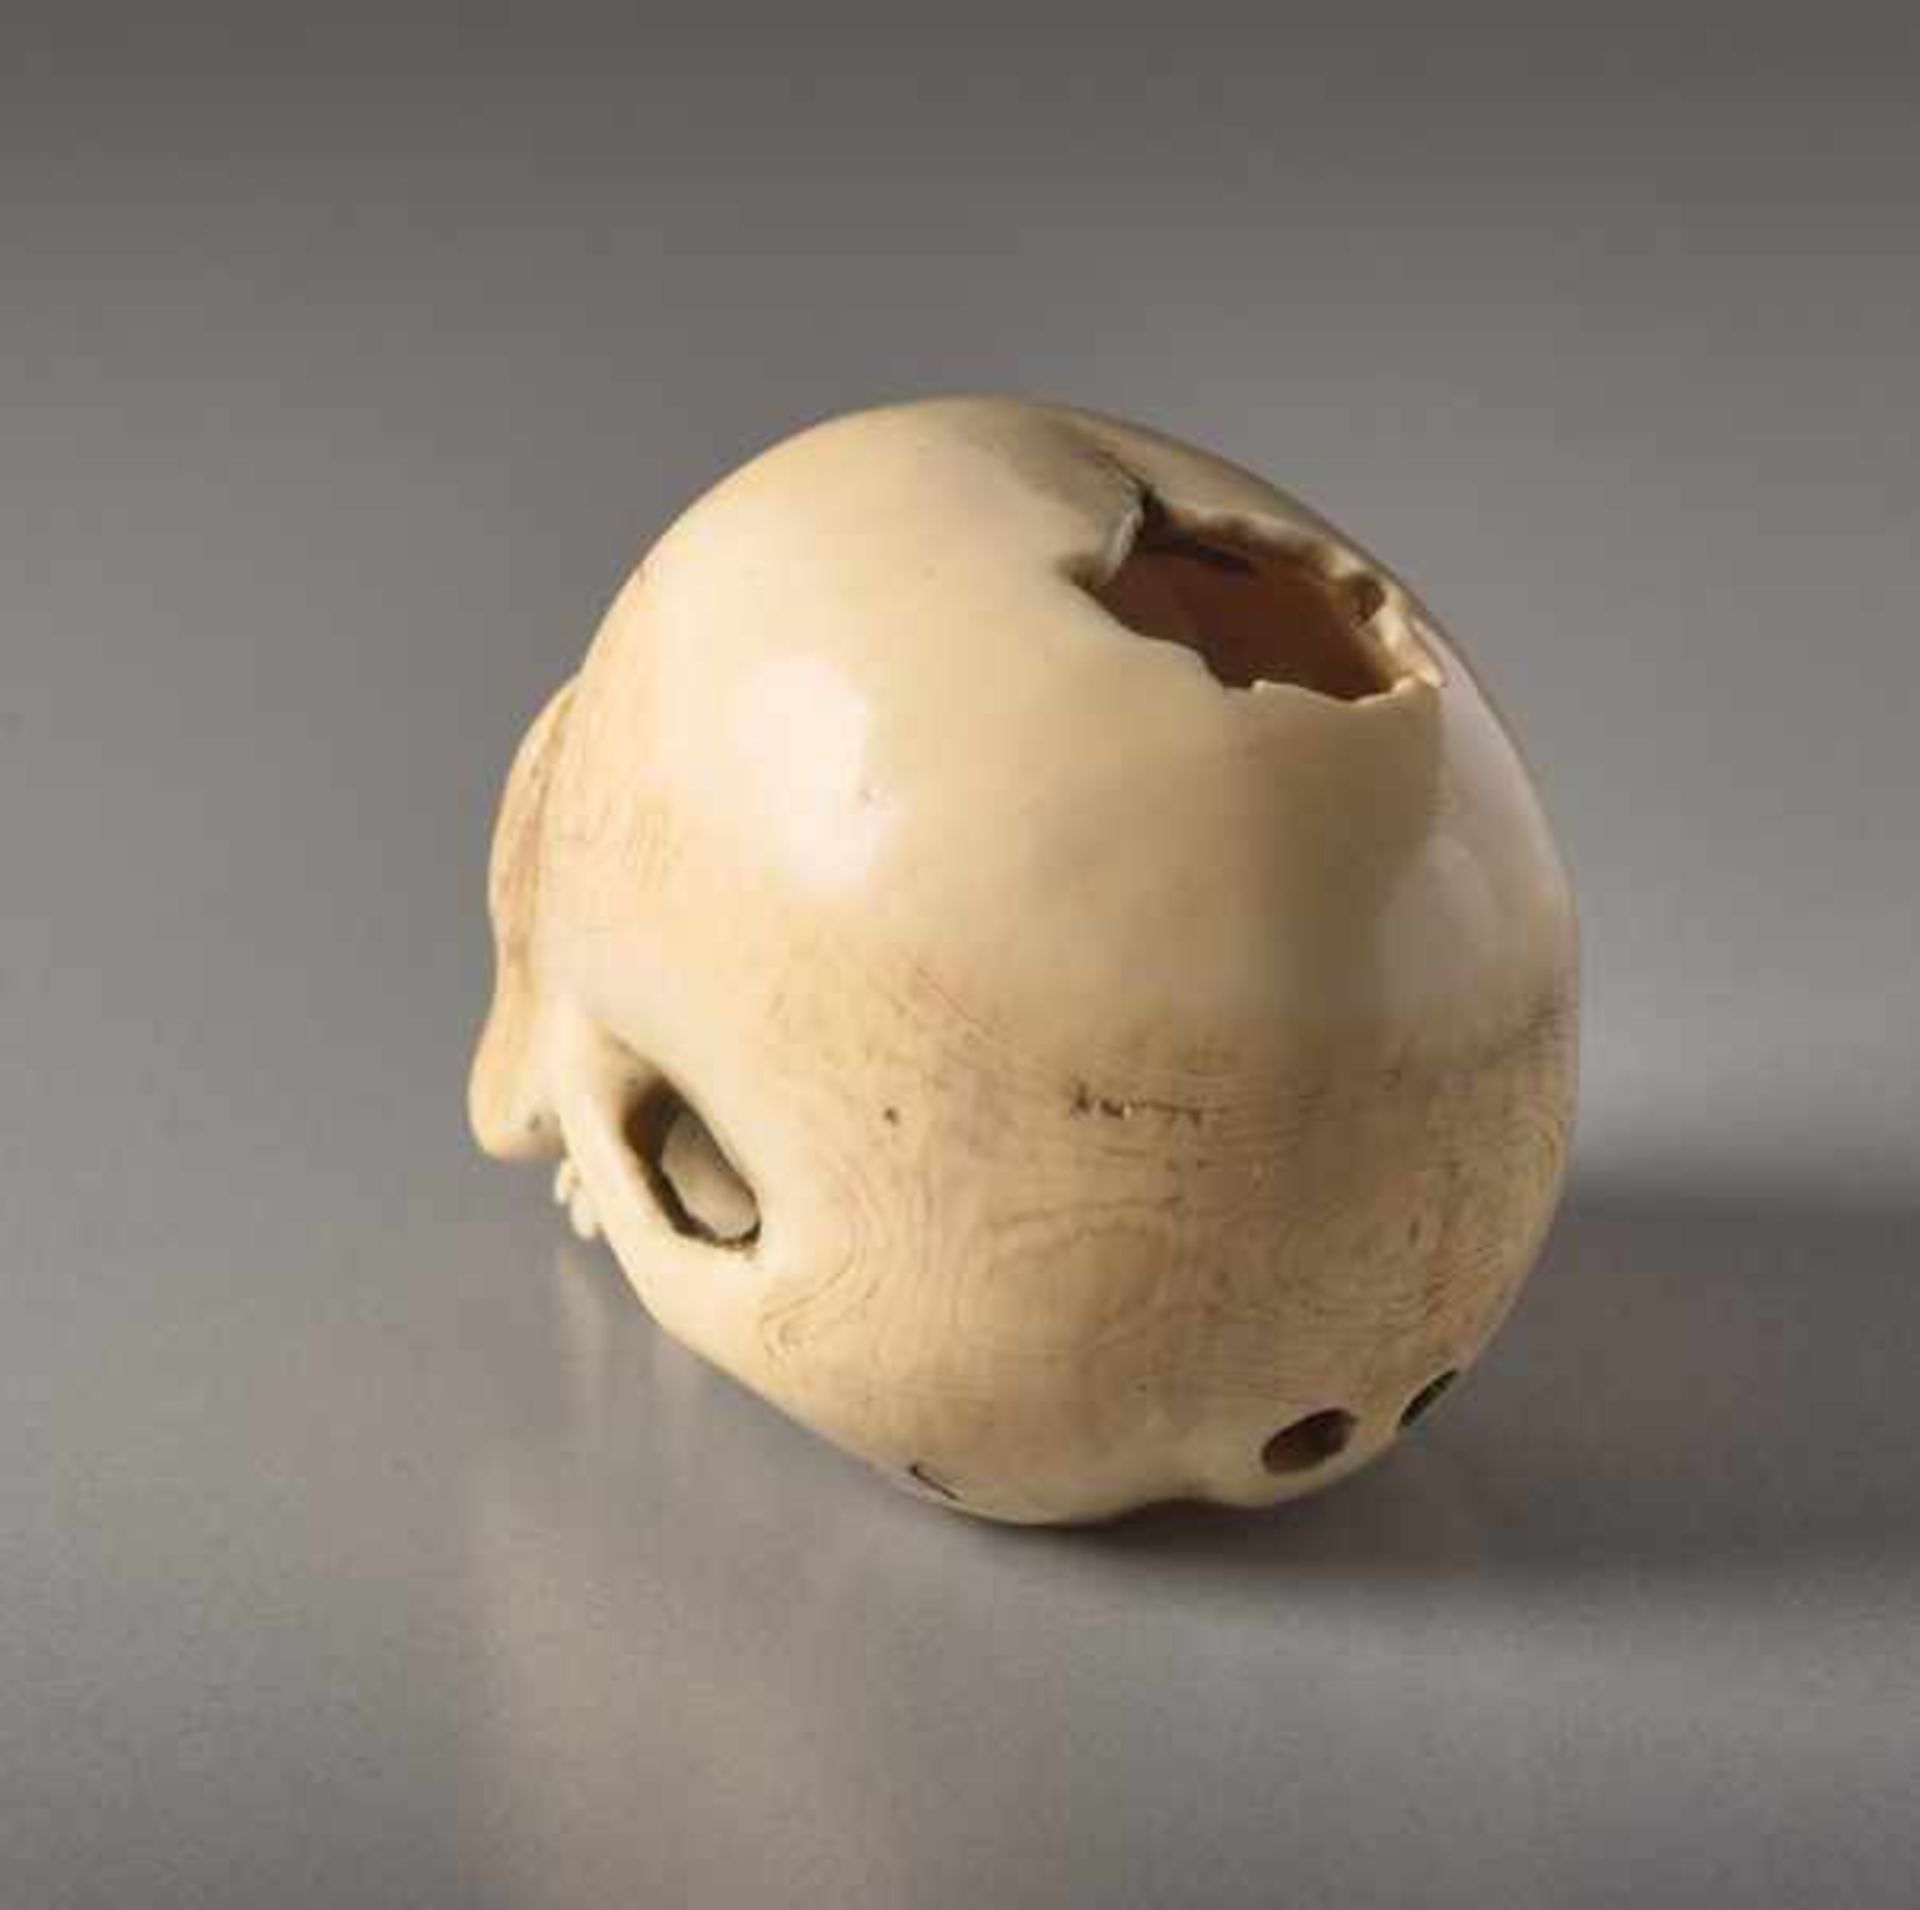 AN IVORY NETSUKE BY SHOZAN OF A SKULL Ivory netsuke. Japan, 19th centuryAn excellently crafted, - Image 4 of 7